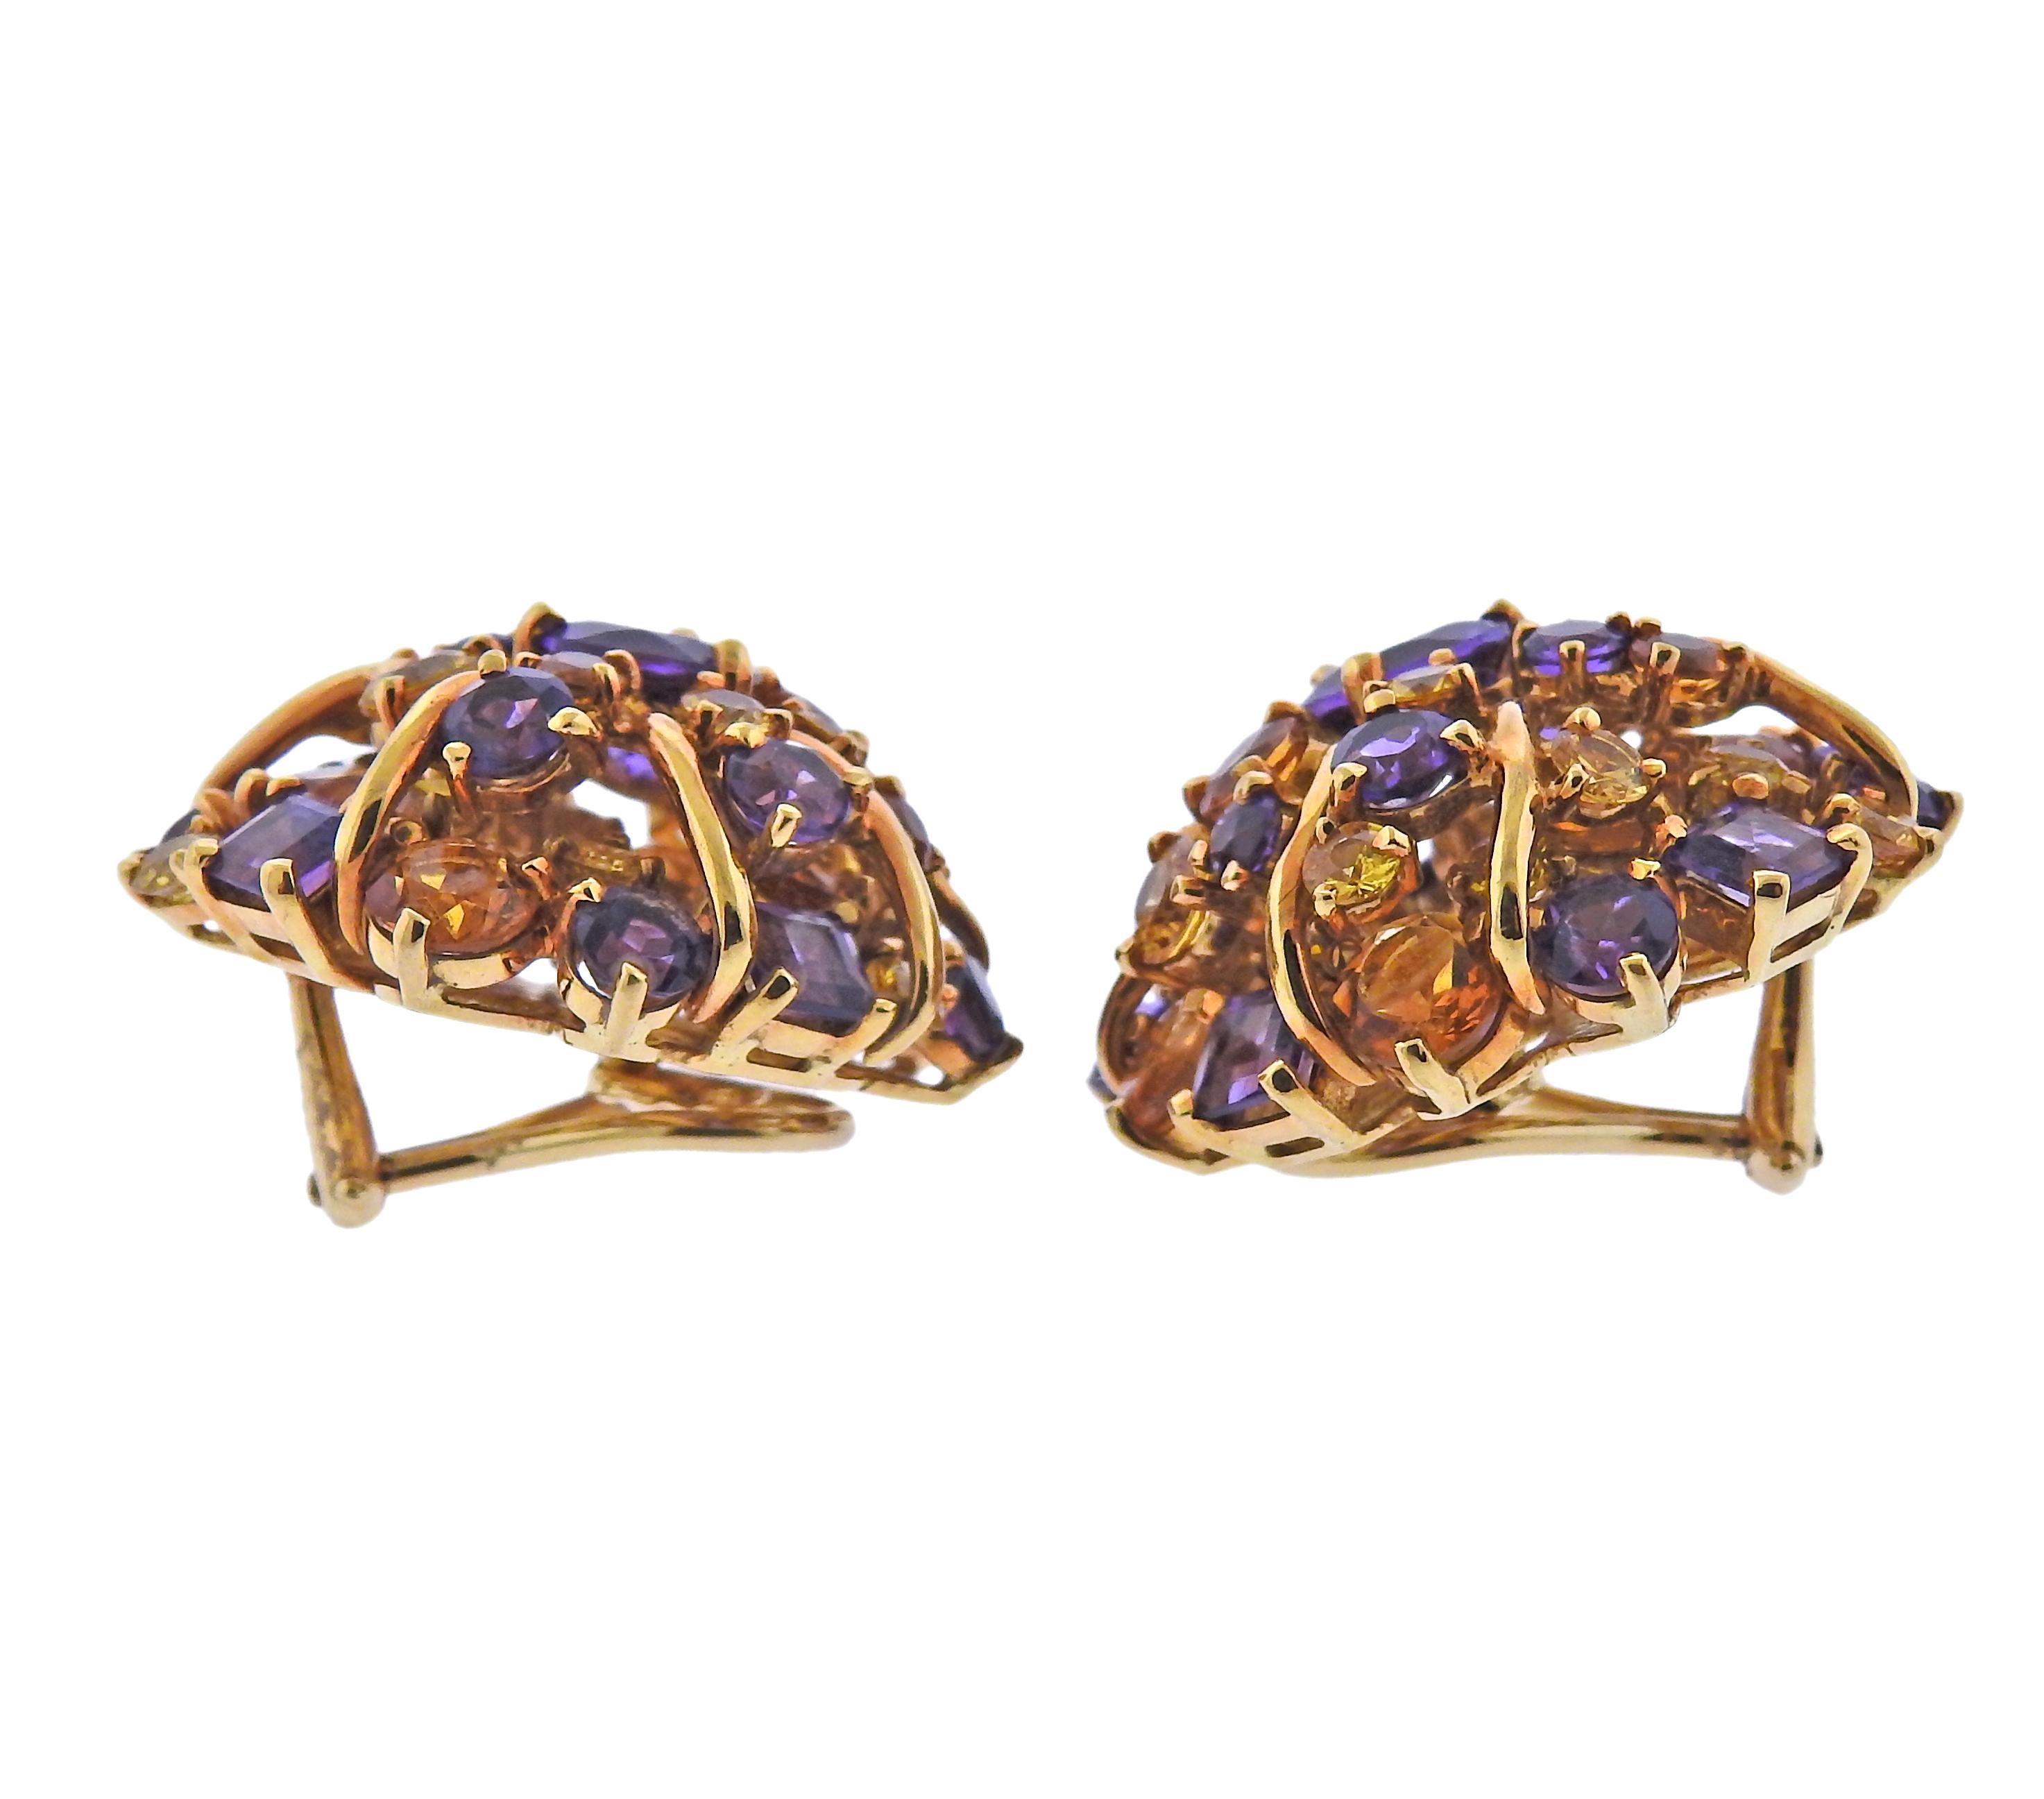 Pair of 18k yellow gold cocktail earrings by Seaman Schepps, with amethyst and citrines. Come with Seman Schepps pouch. Earrings are 26mm in diameter.  Weight - 29.8 grams. Marked: Shell mark, 750, 7607. 